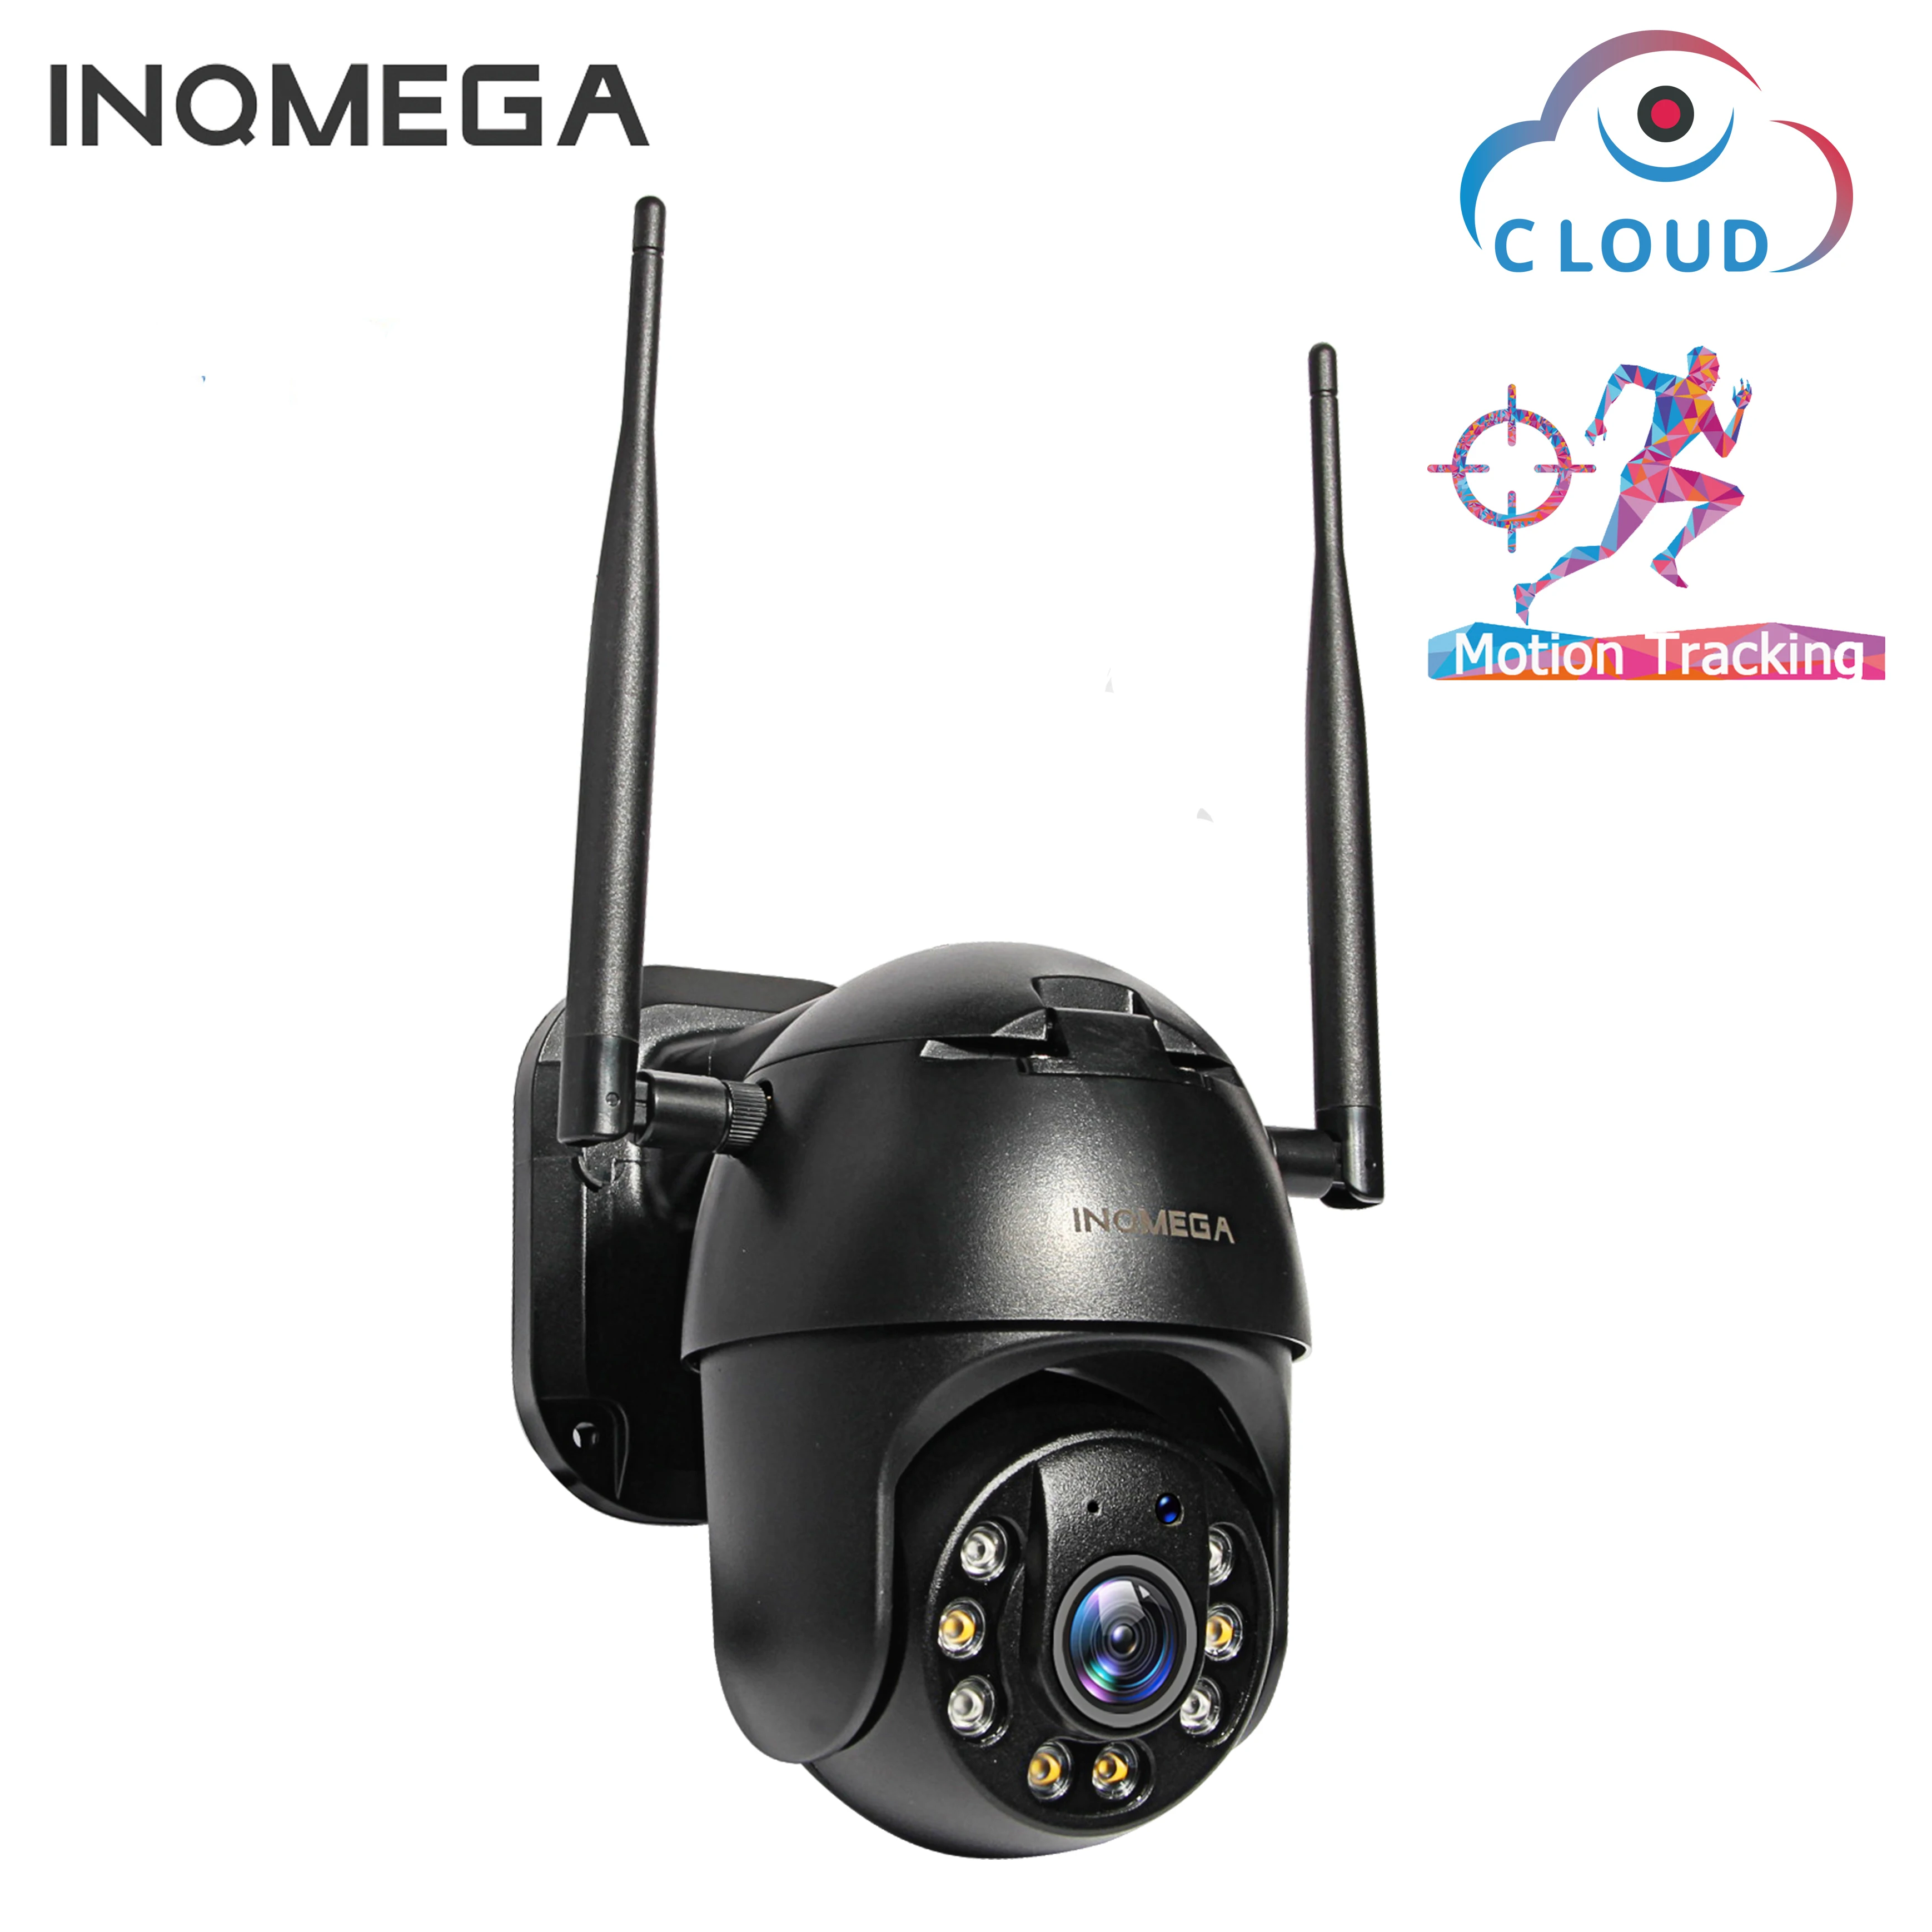 

INQMEGA 1080P PTZ IP Camera Wireless Auto Tracking Outdoor Waterproof 4X Digital Zoom Speed Dome 1Inch WiFi Security CCTV Camera